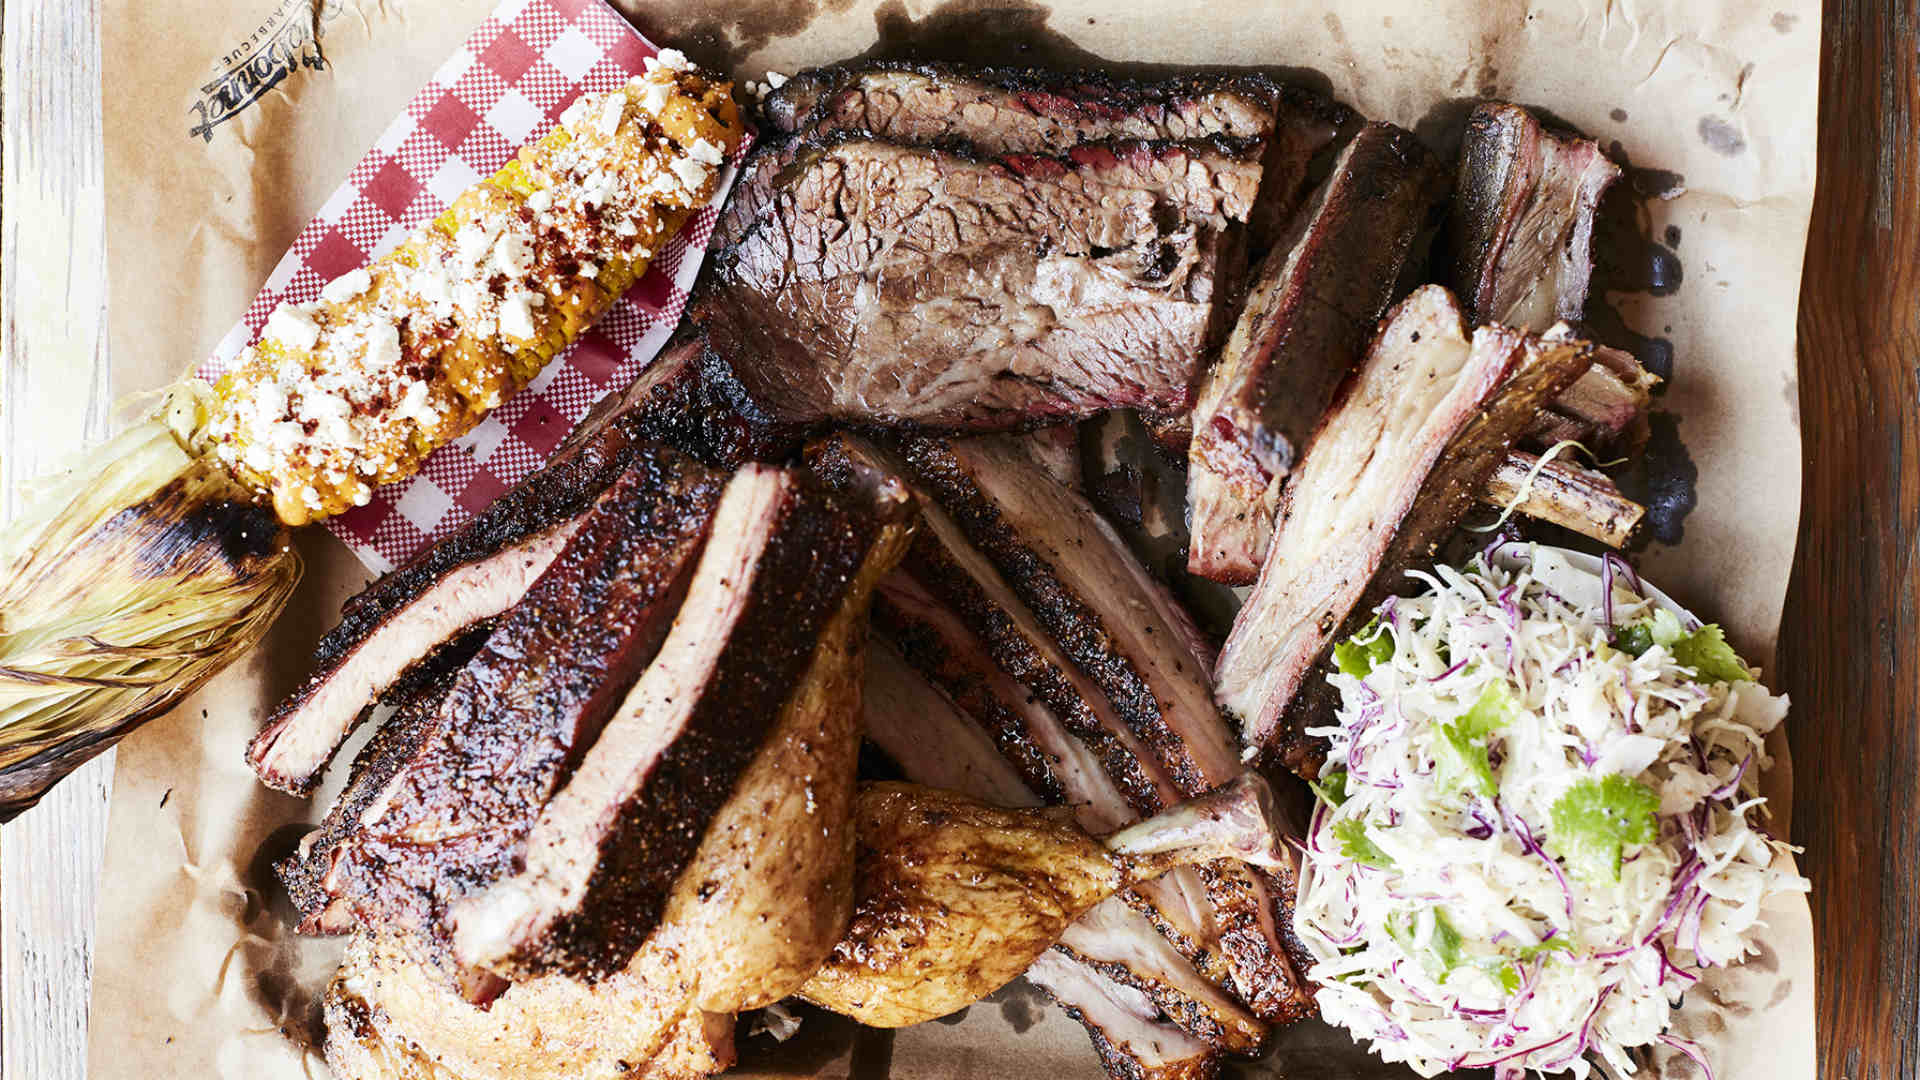 Bluebonnet Barbecue Has Found a Permanent Home in Brunswick East